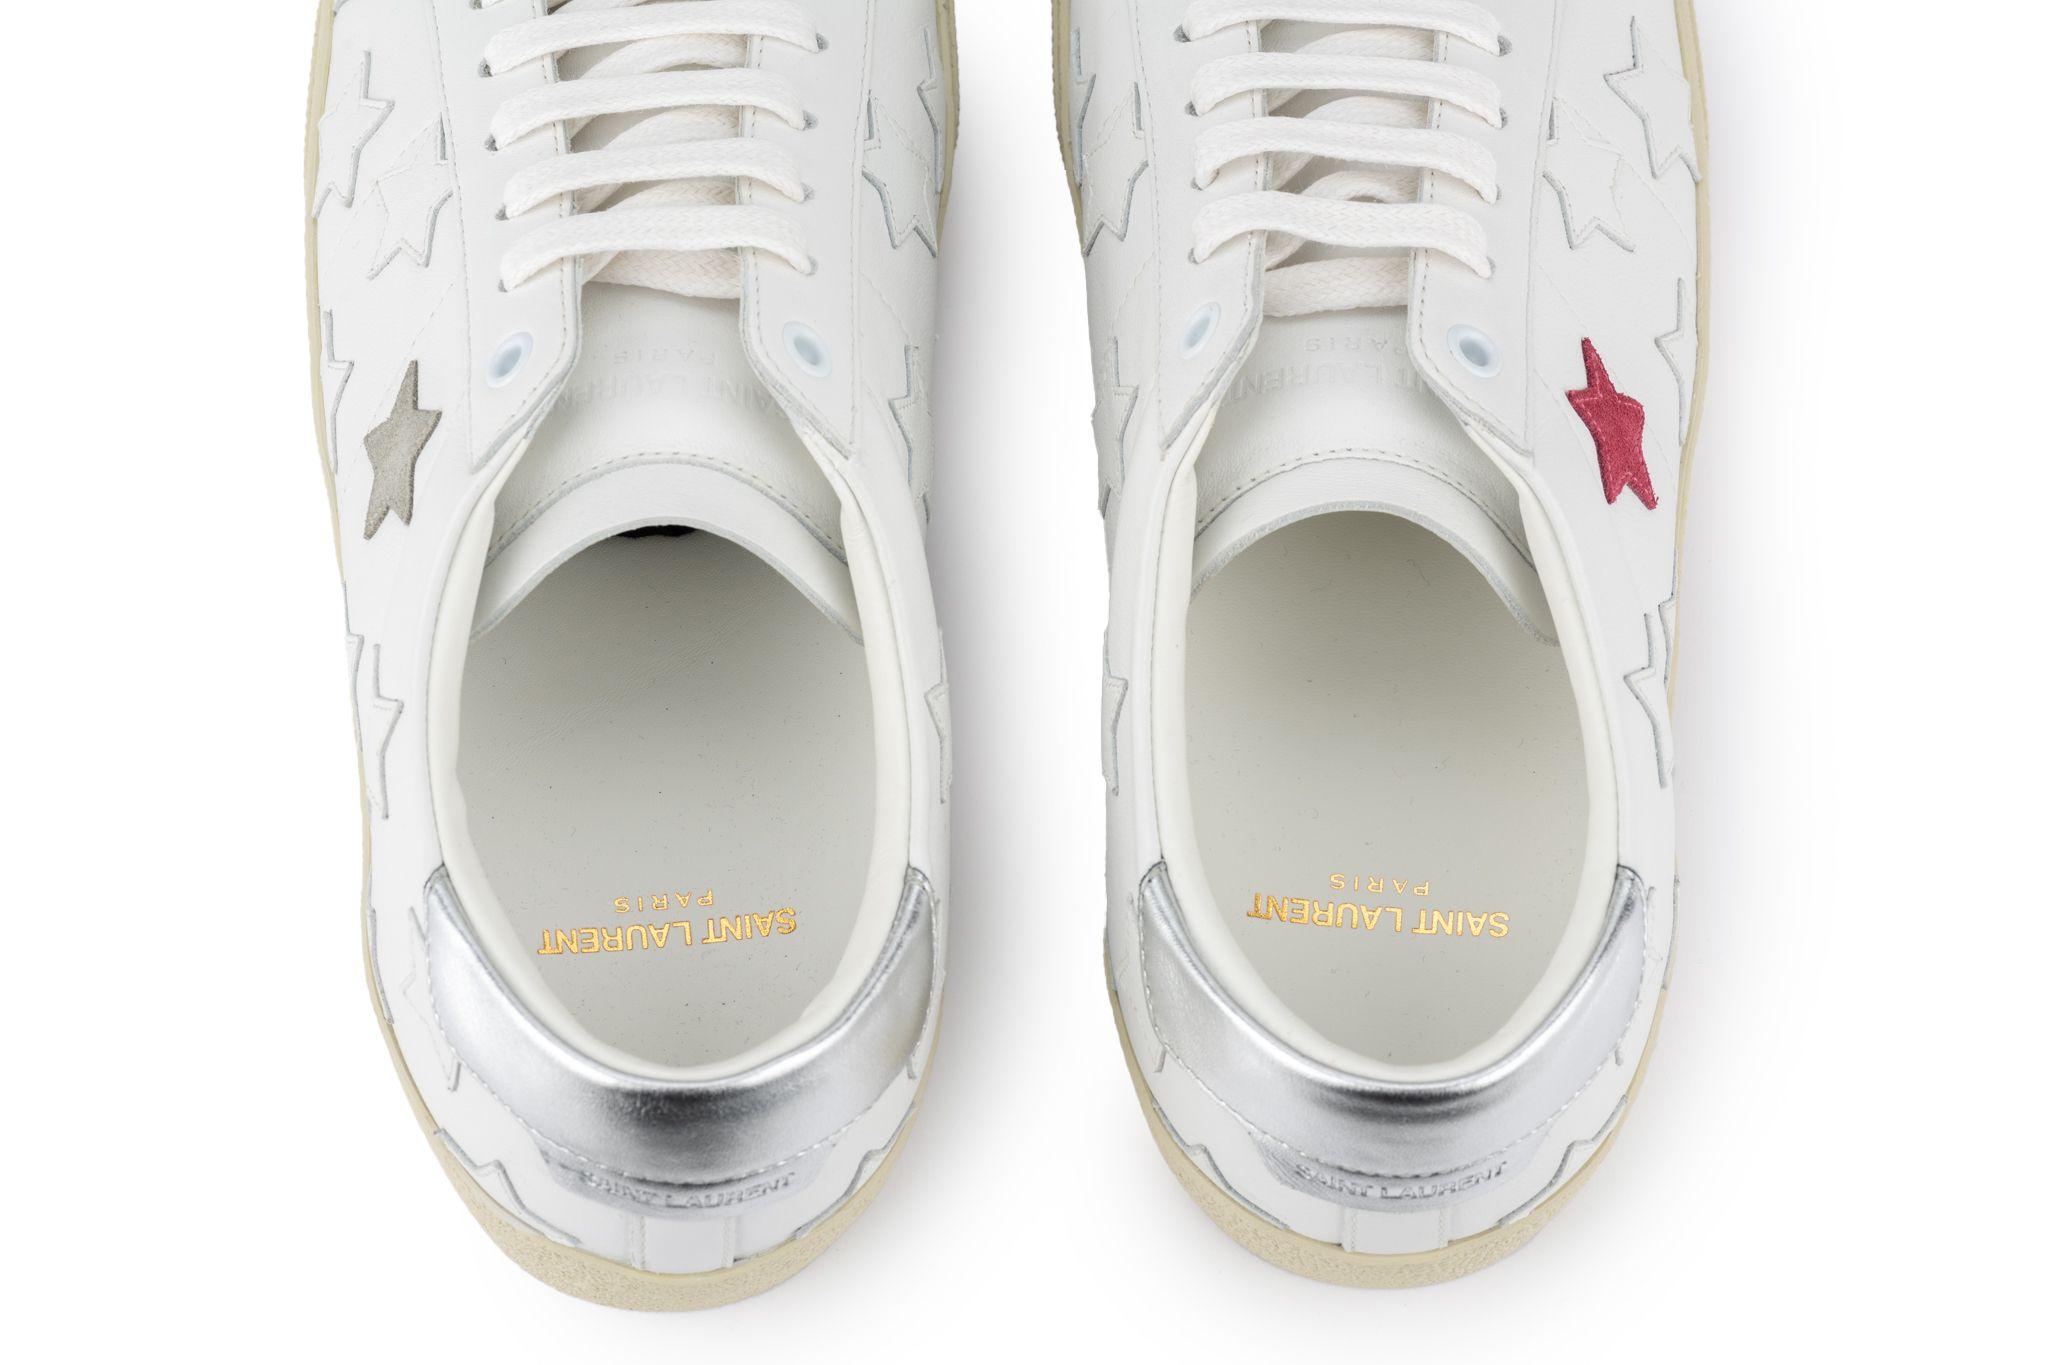 YSL brand new white sneakers with embroidered stars. Retail price $799.
European 42.5.
Comes with additional laces, booklet, original dustcover and box.
